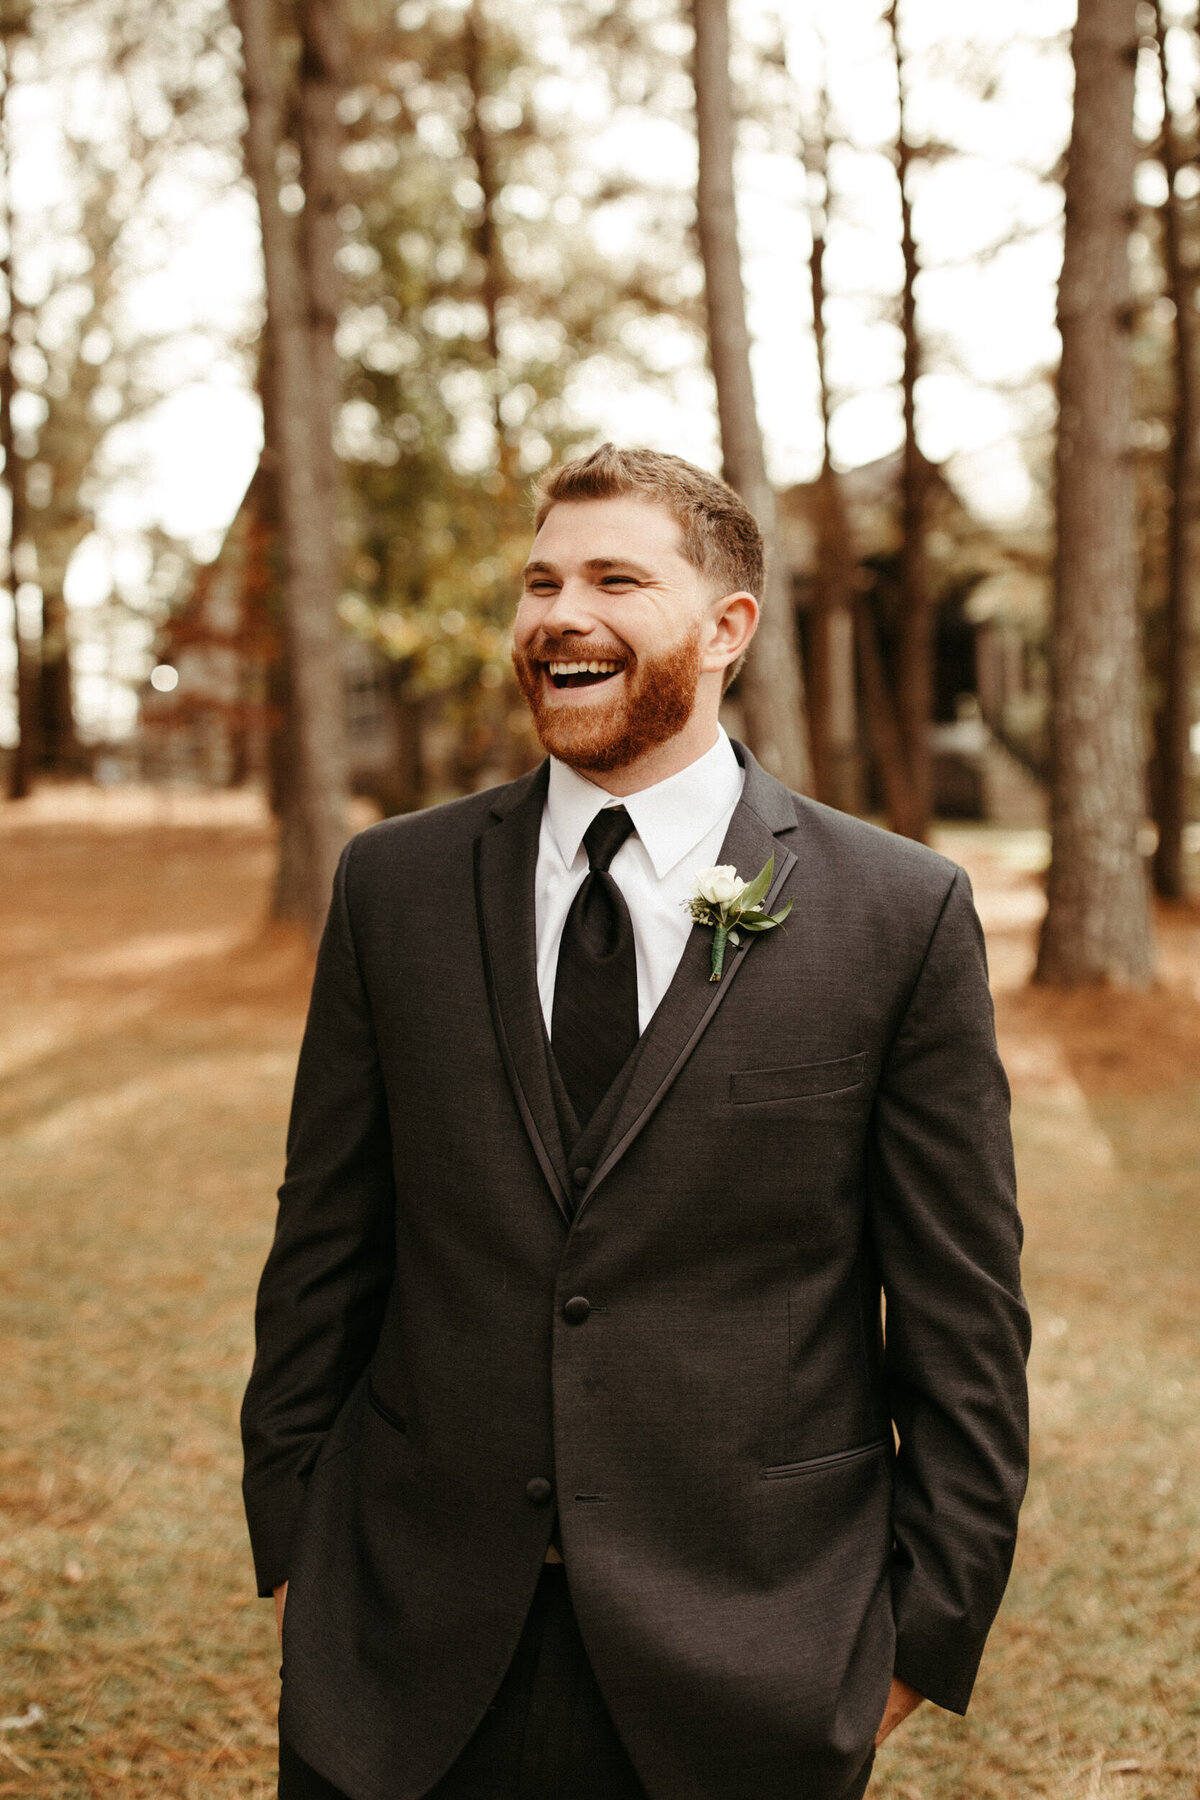 Groom in grey suit and simple greenery boutonniere smiling